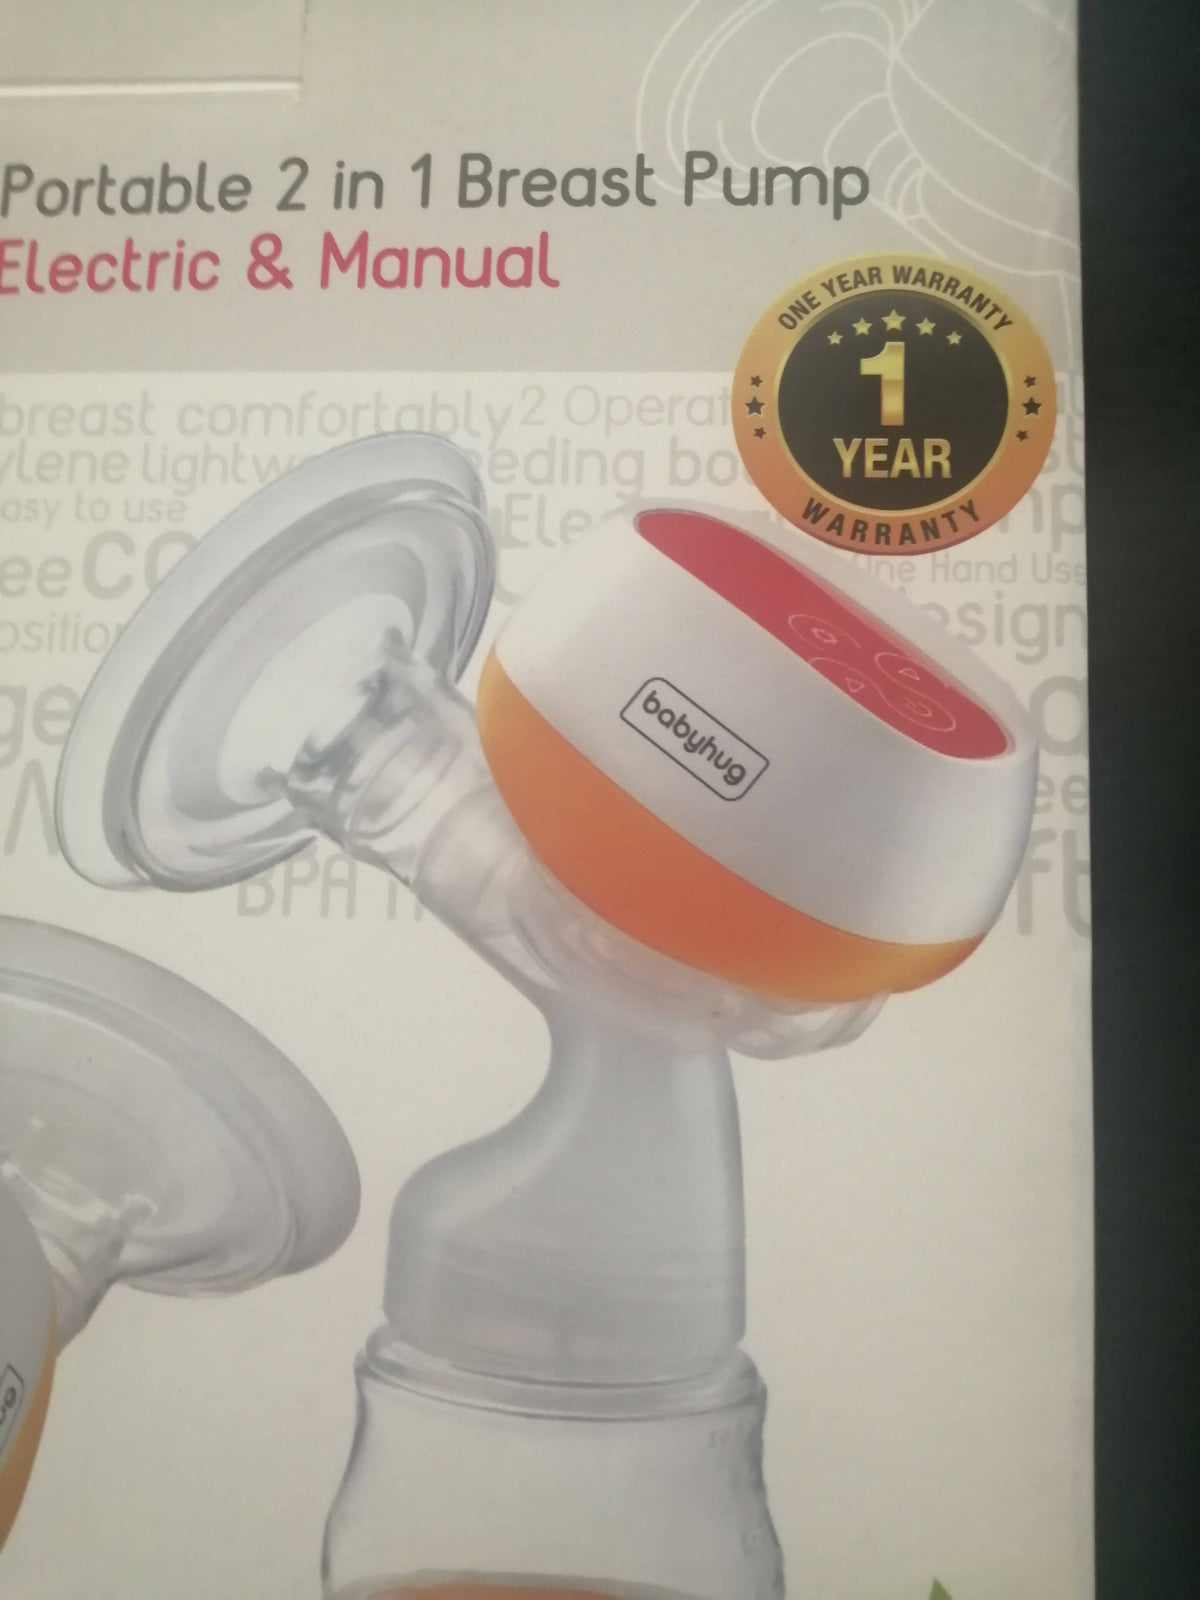 BABYHUG Portable 2 in 1 Electric & Manual Breast Pump - Brand new